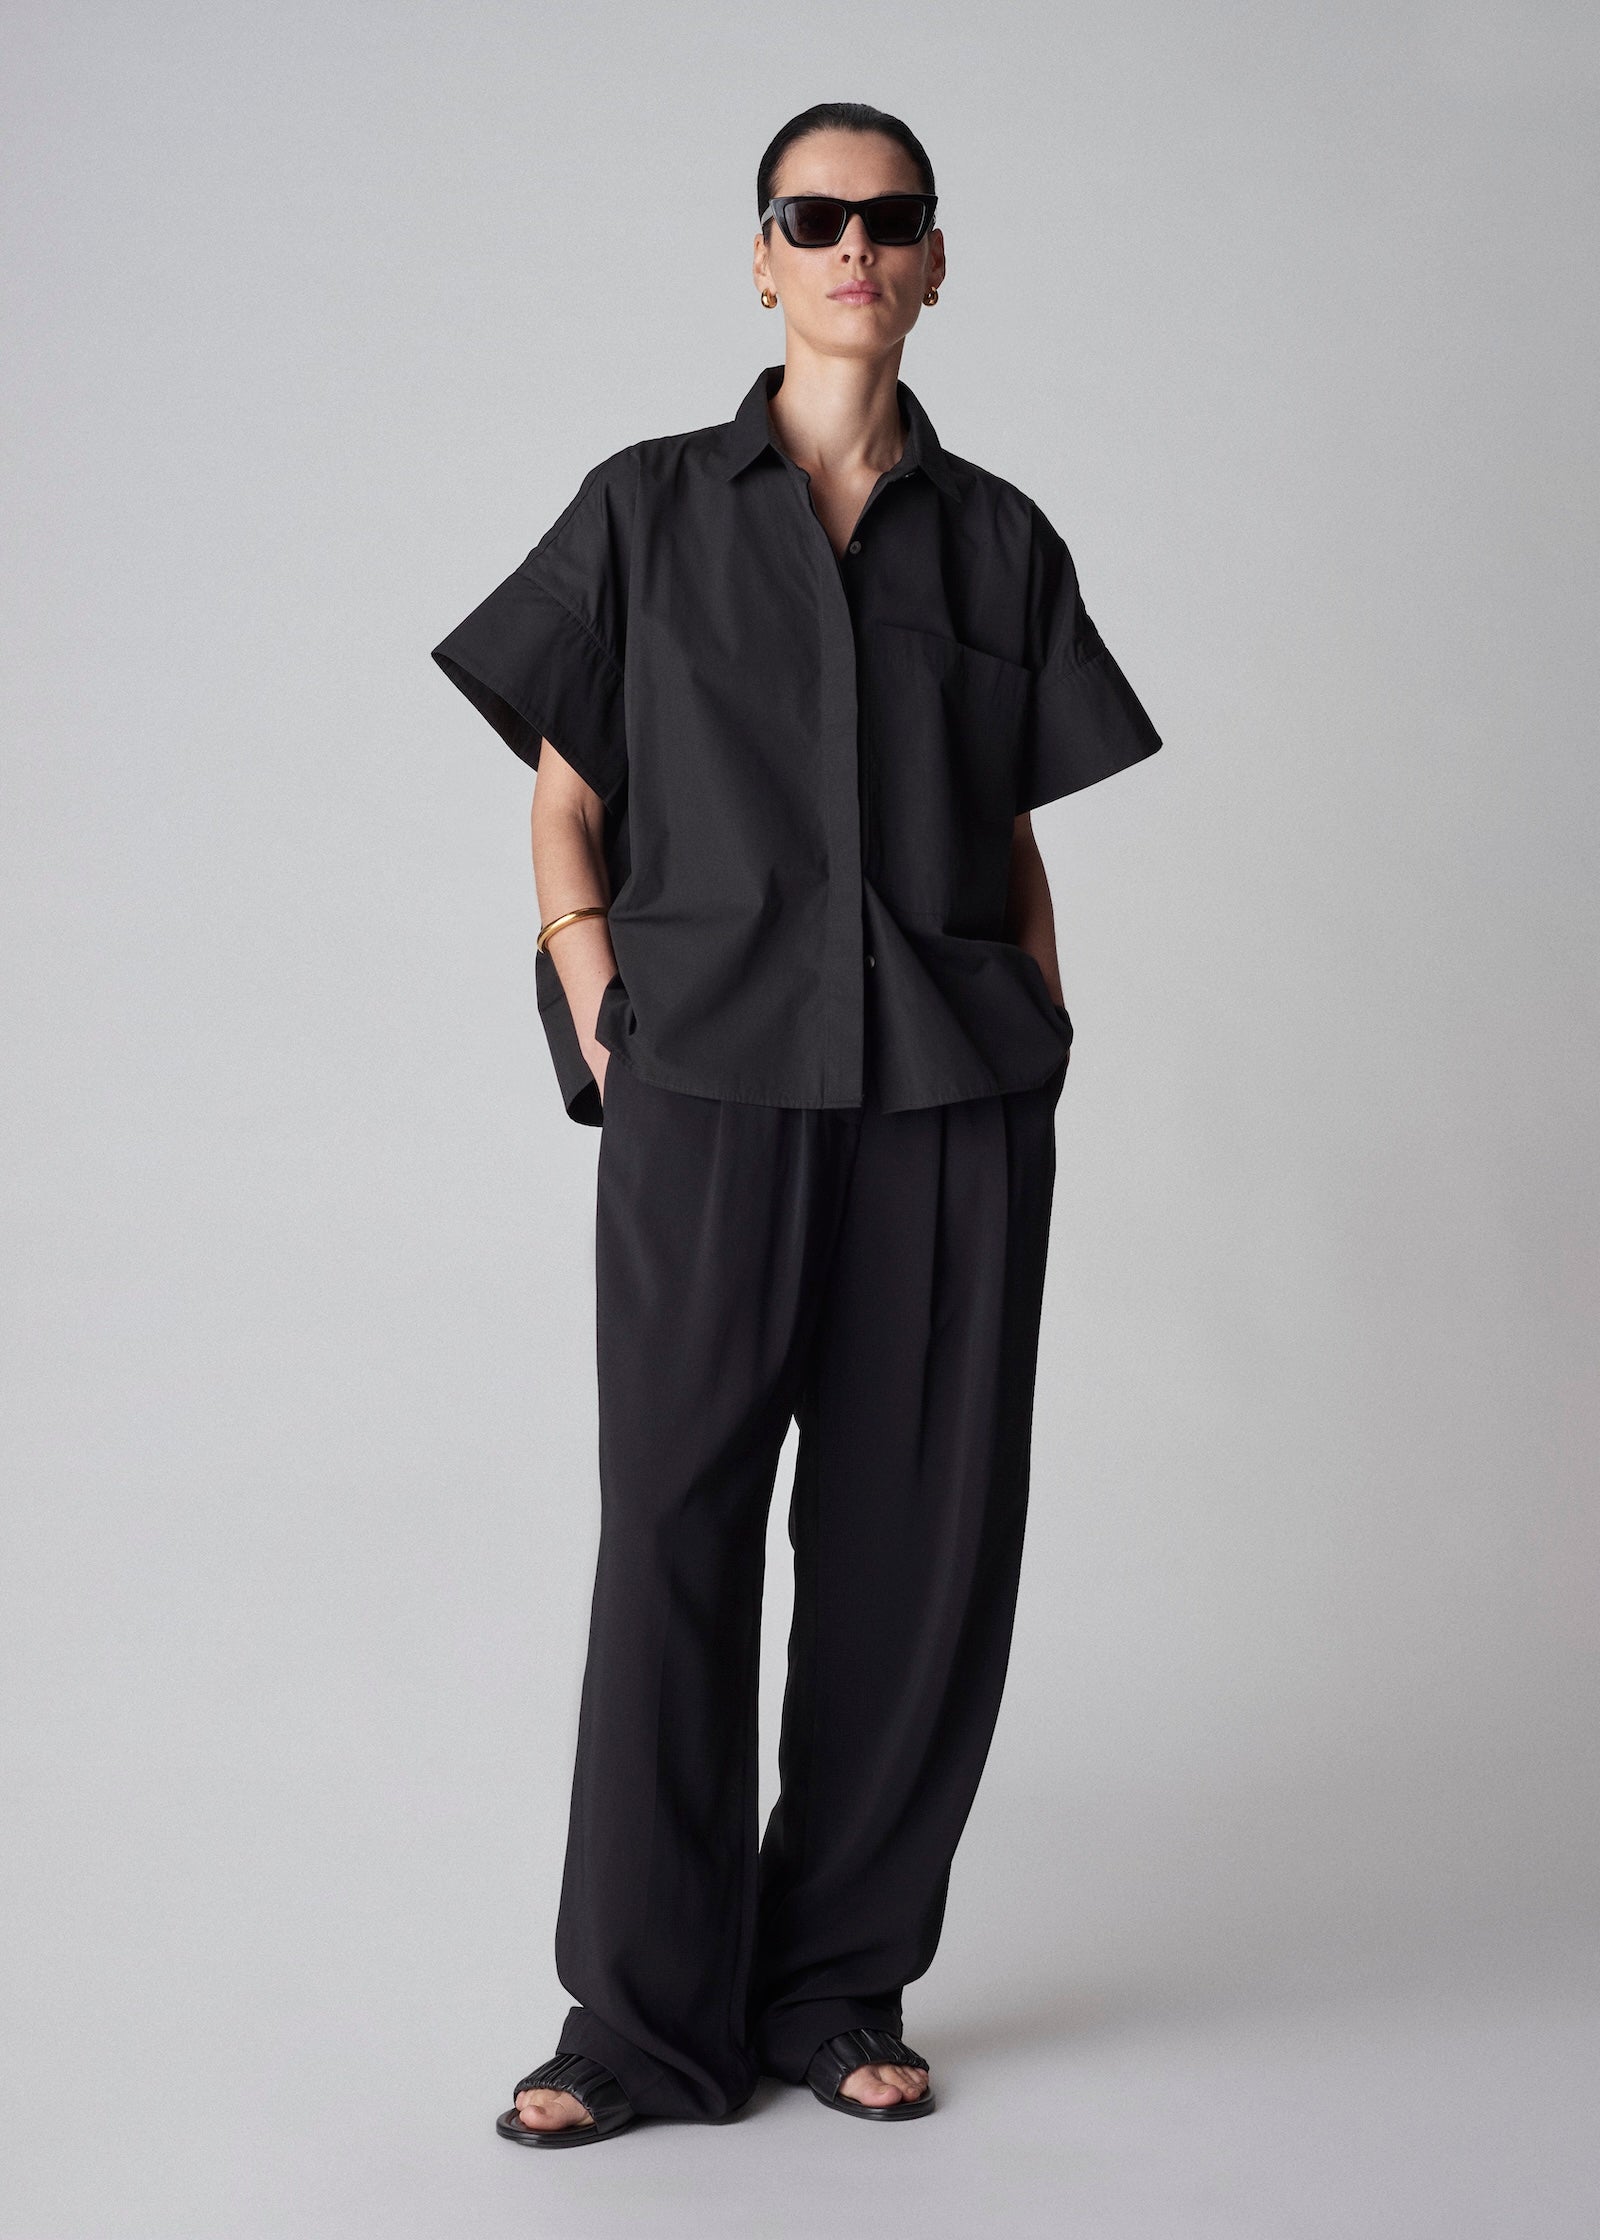 Boxy Short Sleeve Shirt in Cotton Poplin - Black - CO Collections